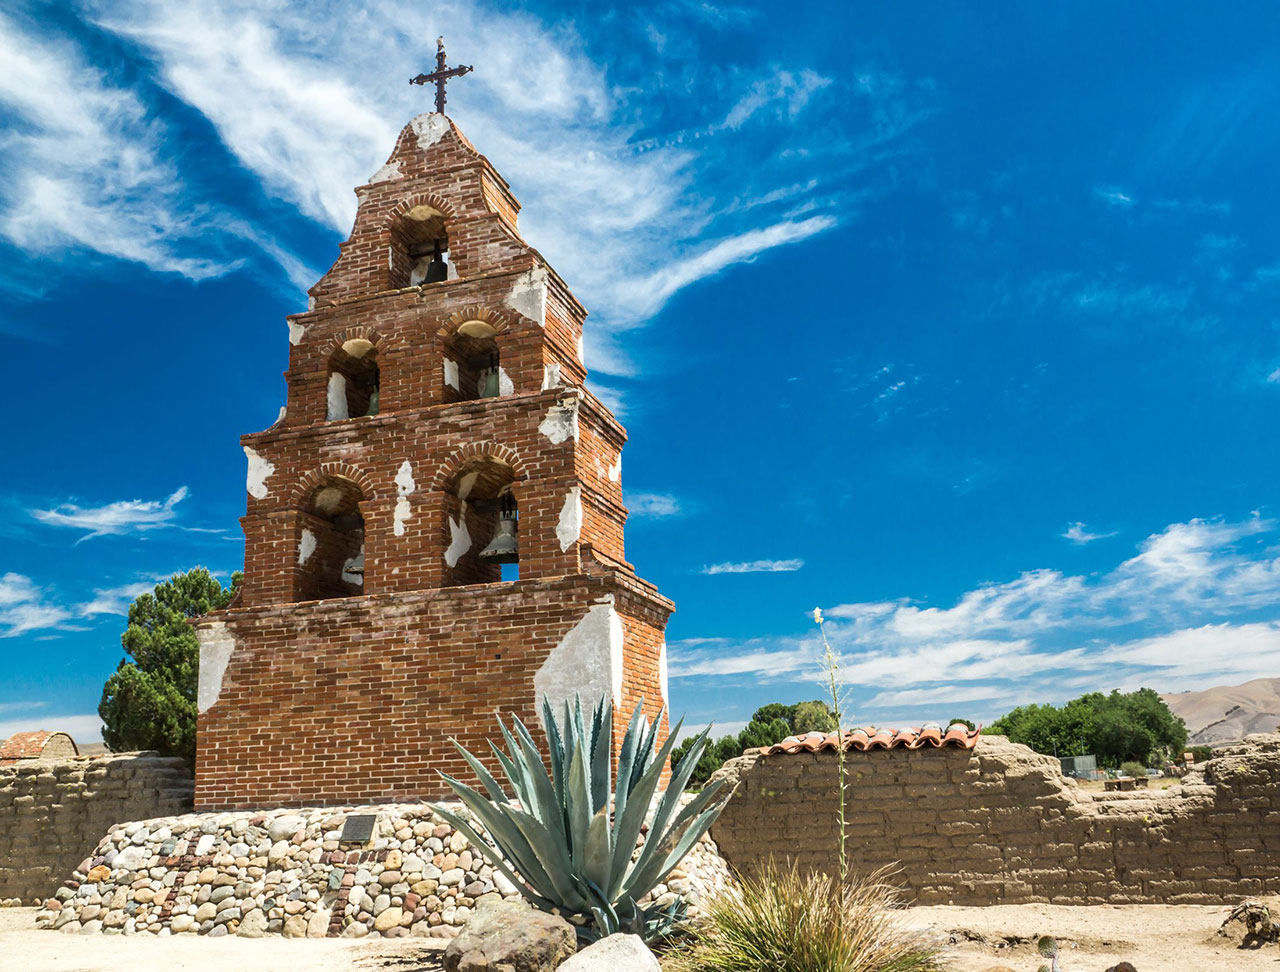 The remaining belltower at mission San Miguel Arcangel in California.